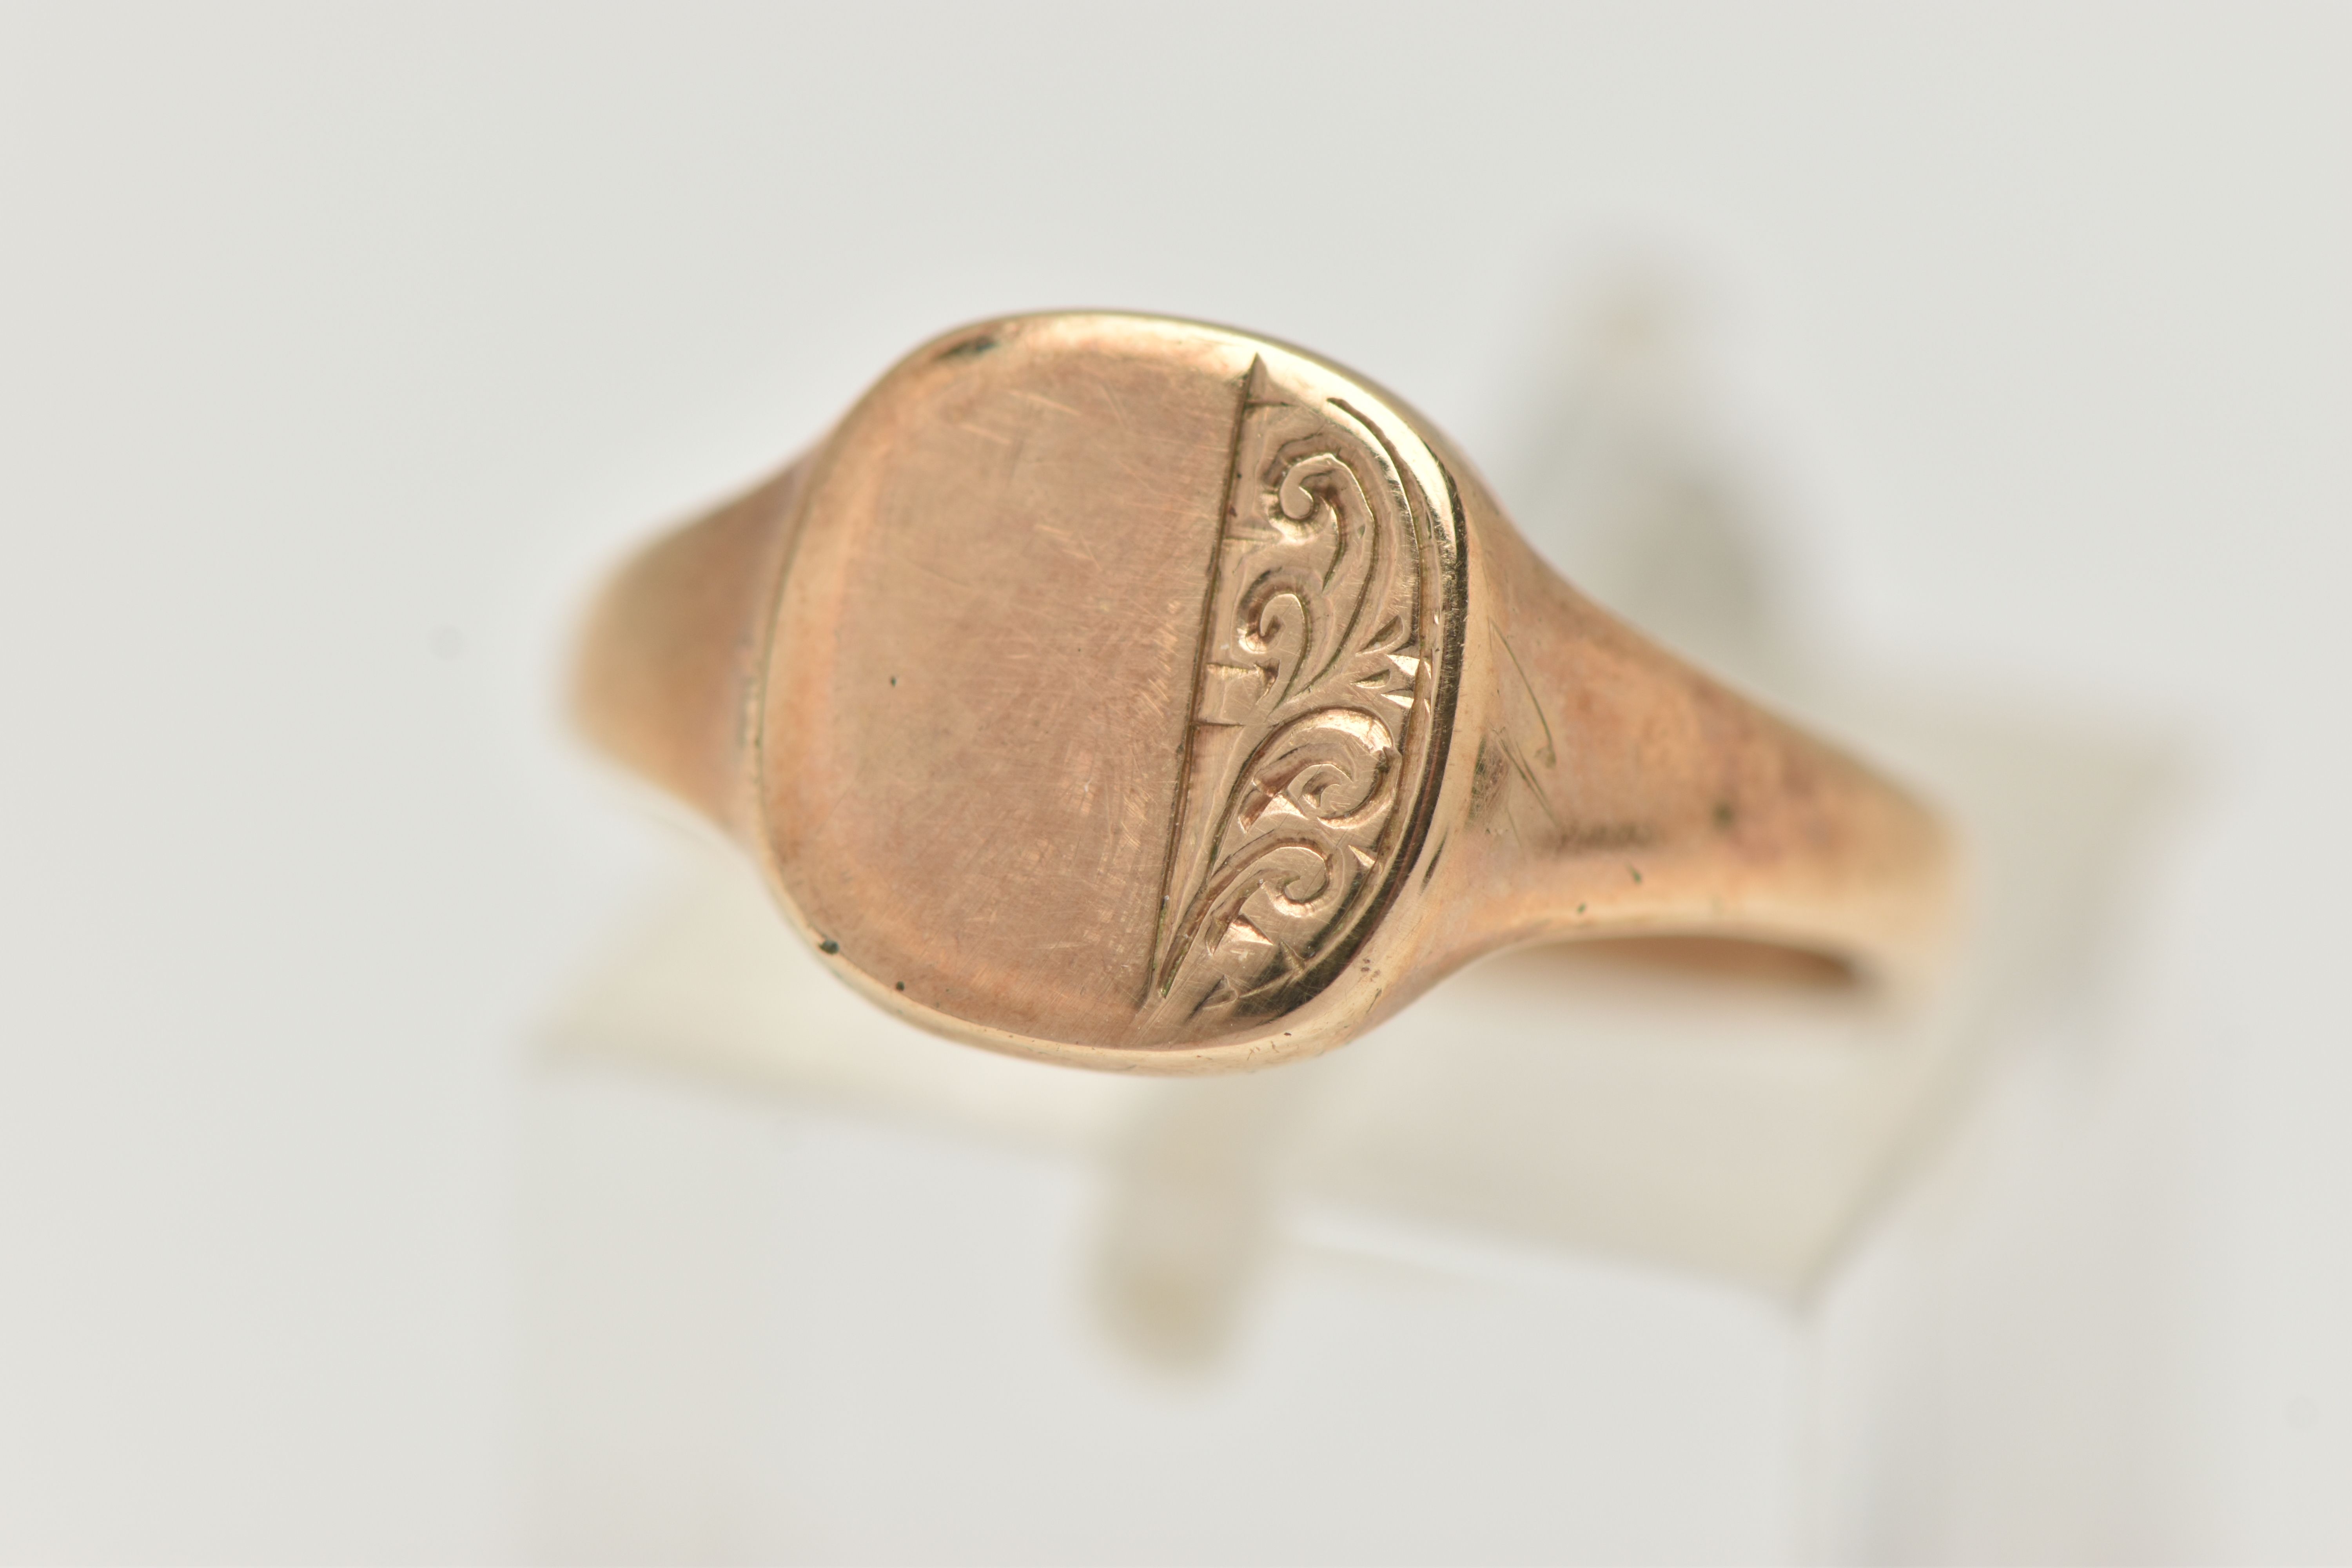 A 9CT GOLD SIGNET RING, rounded square form, with foliate pattern, tapering polished band,